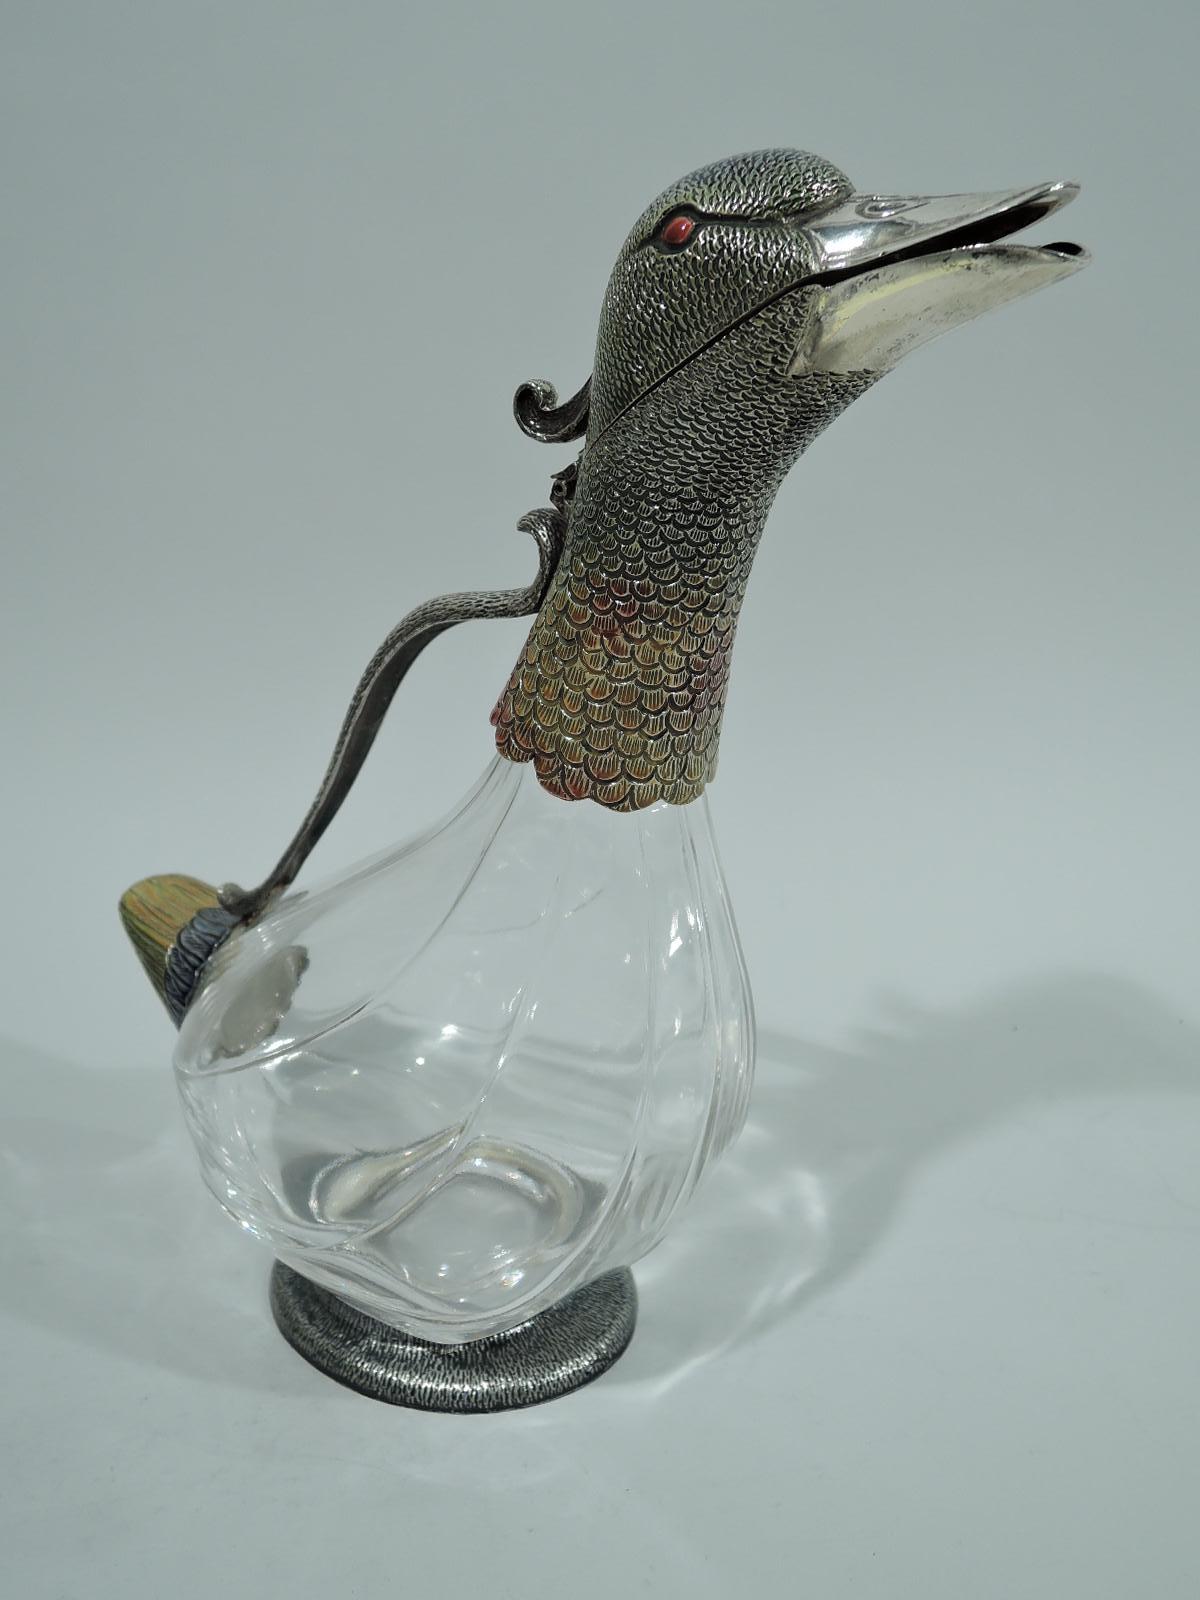 Modern glass and enameled sterling silver figural bird decanter. A duck with clear glass body. Head and neck enameled sterling silver with scaly and imbricated feathers. Compact triangular tail and oval base. Head hinged for pouring. “Quack, quack”